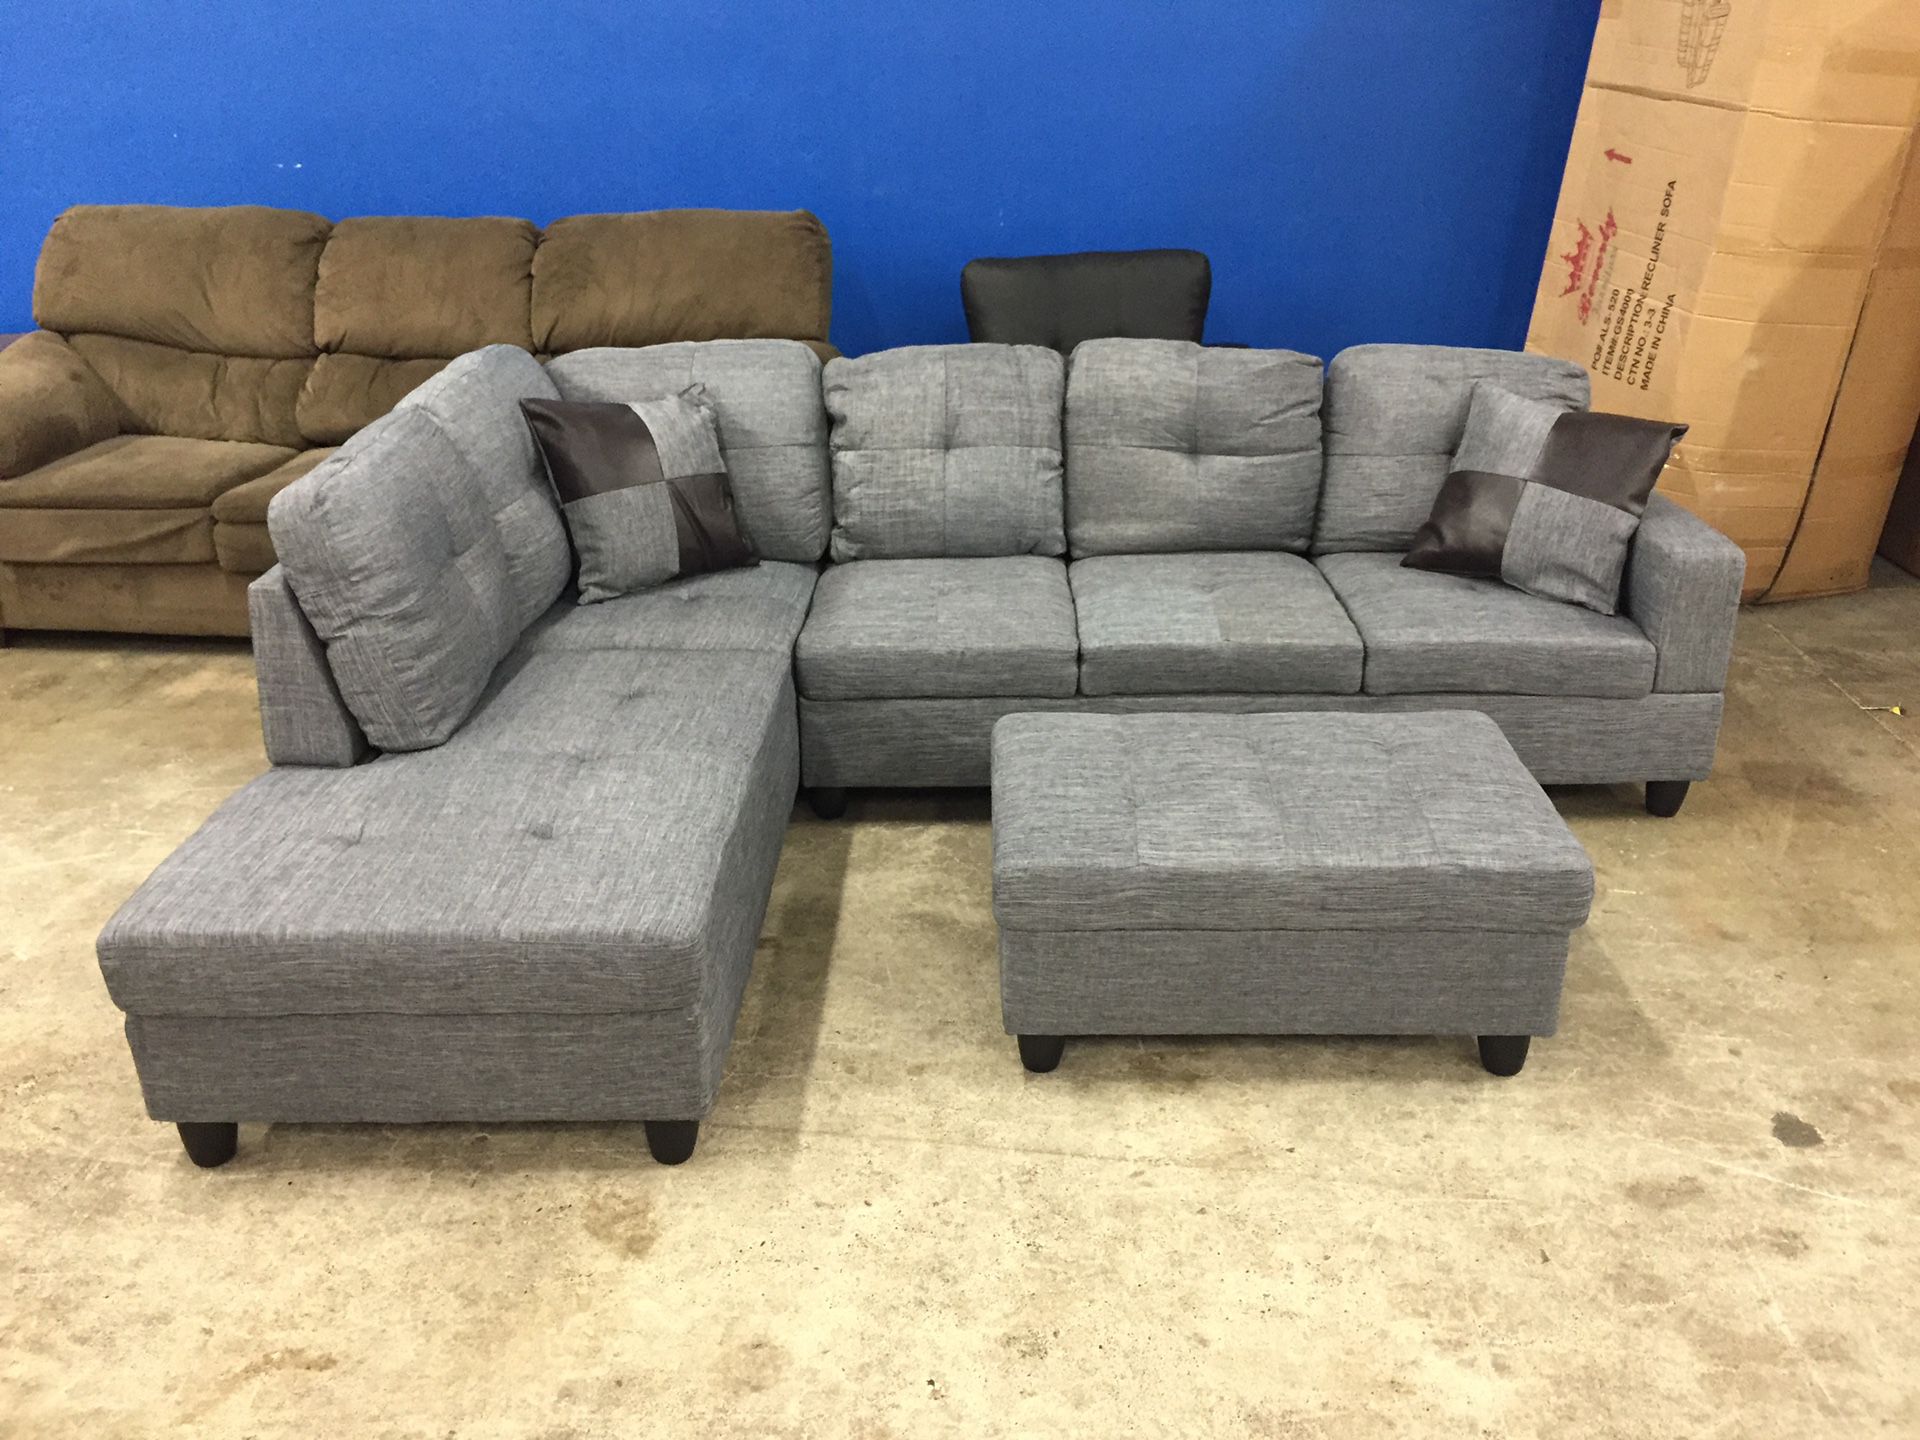 NEW NEVER USED ! Grey sectional couch with storage Ottoman